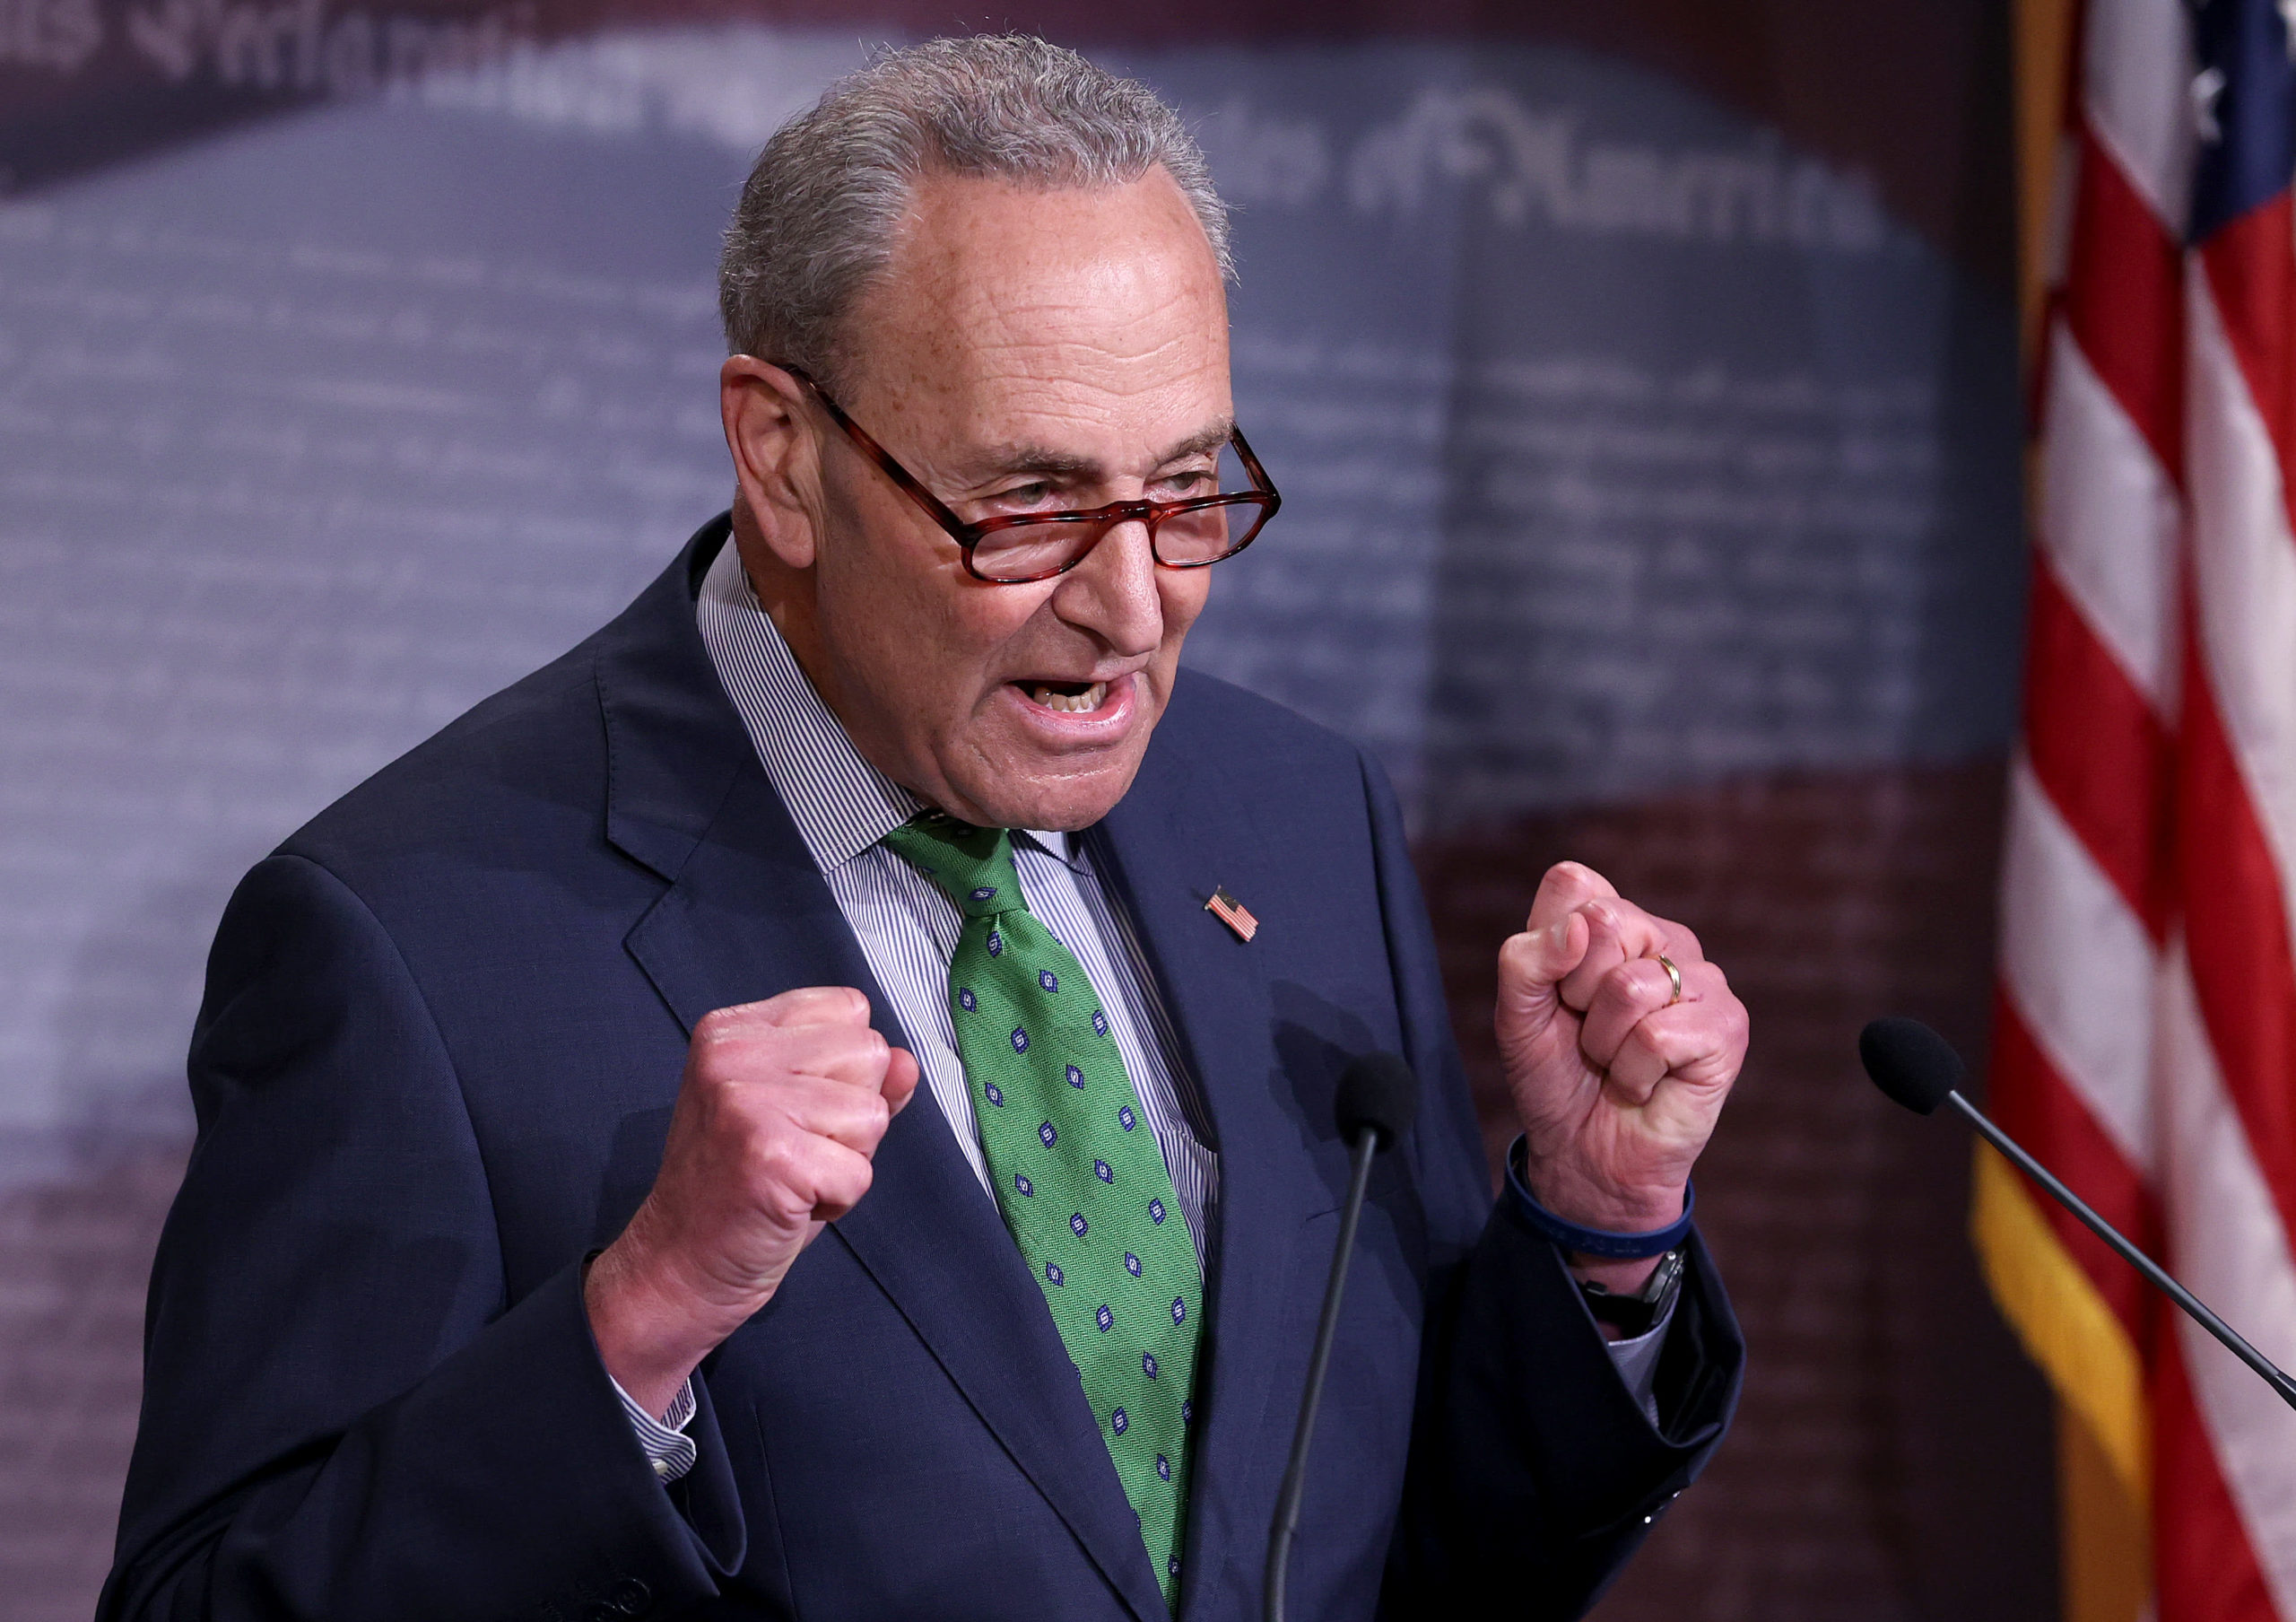 Schumer slams Mnuchin for implying he will not disclose names of PPP recipients